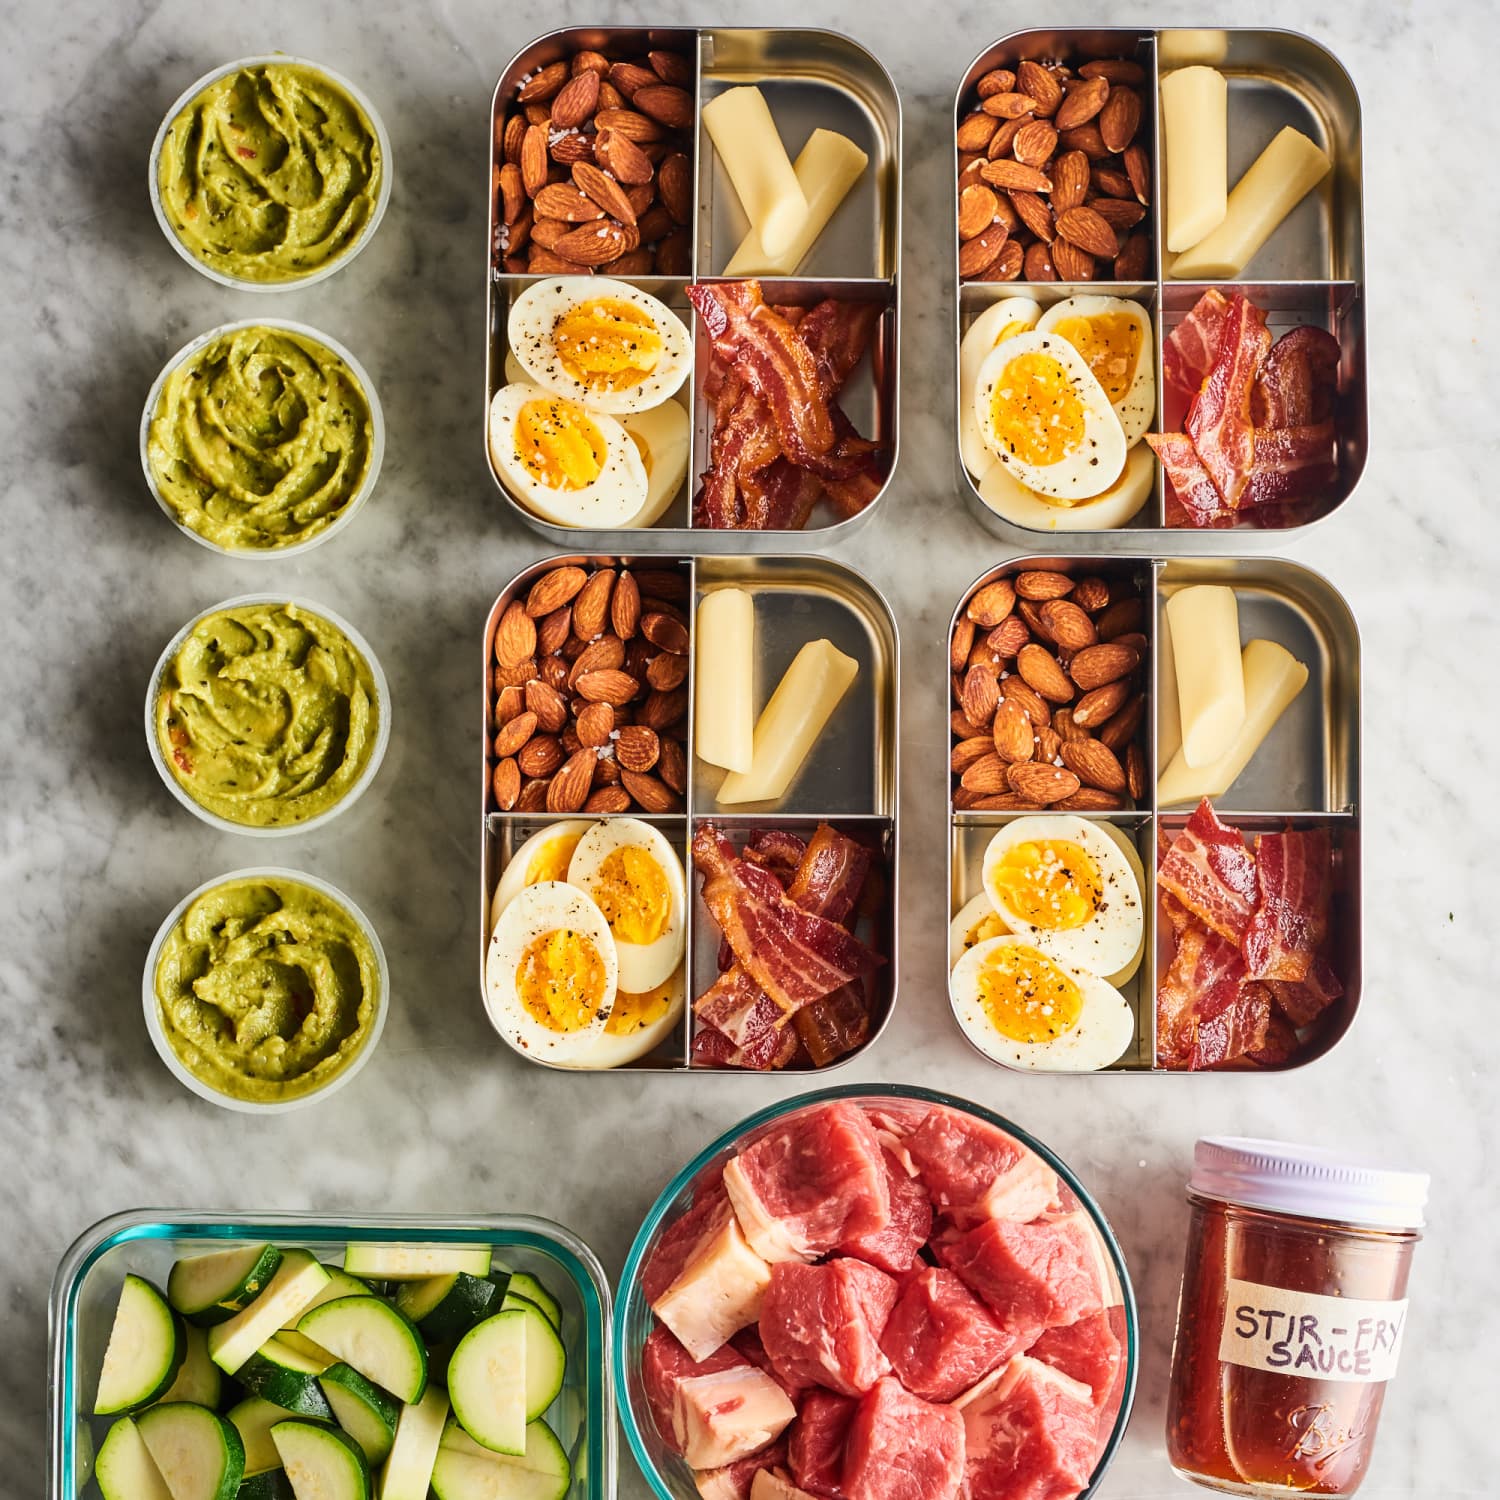 How To Meal Prep 4 Different Lunches In Under 1 Hour 